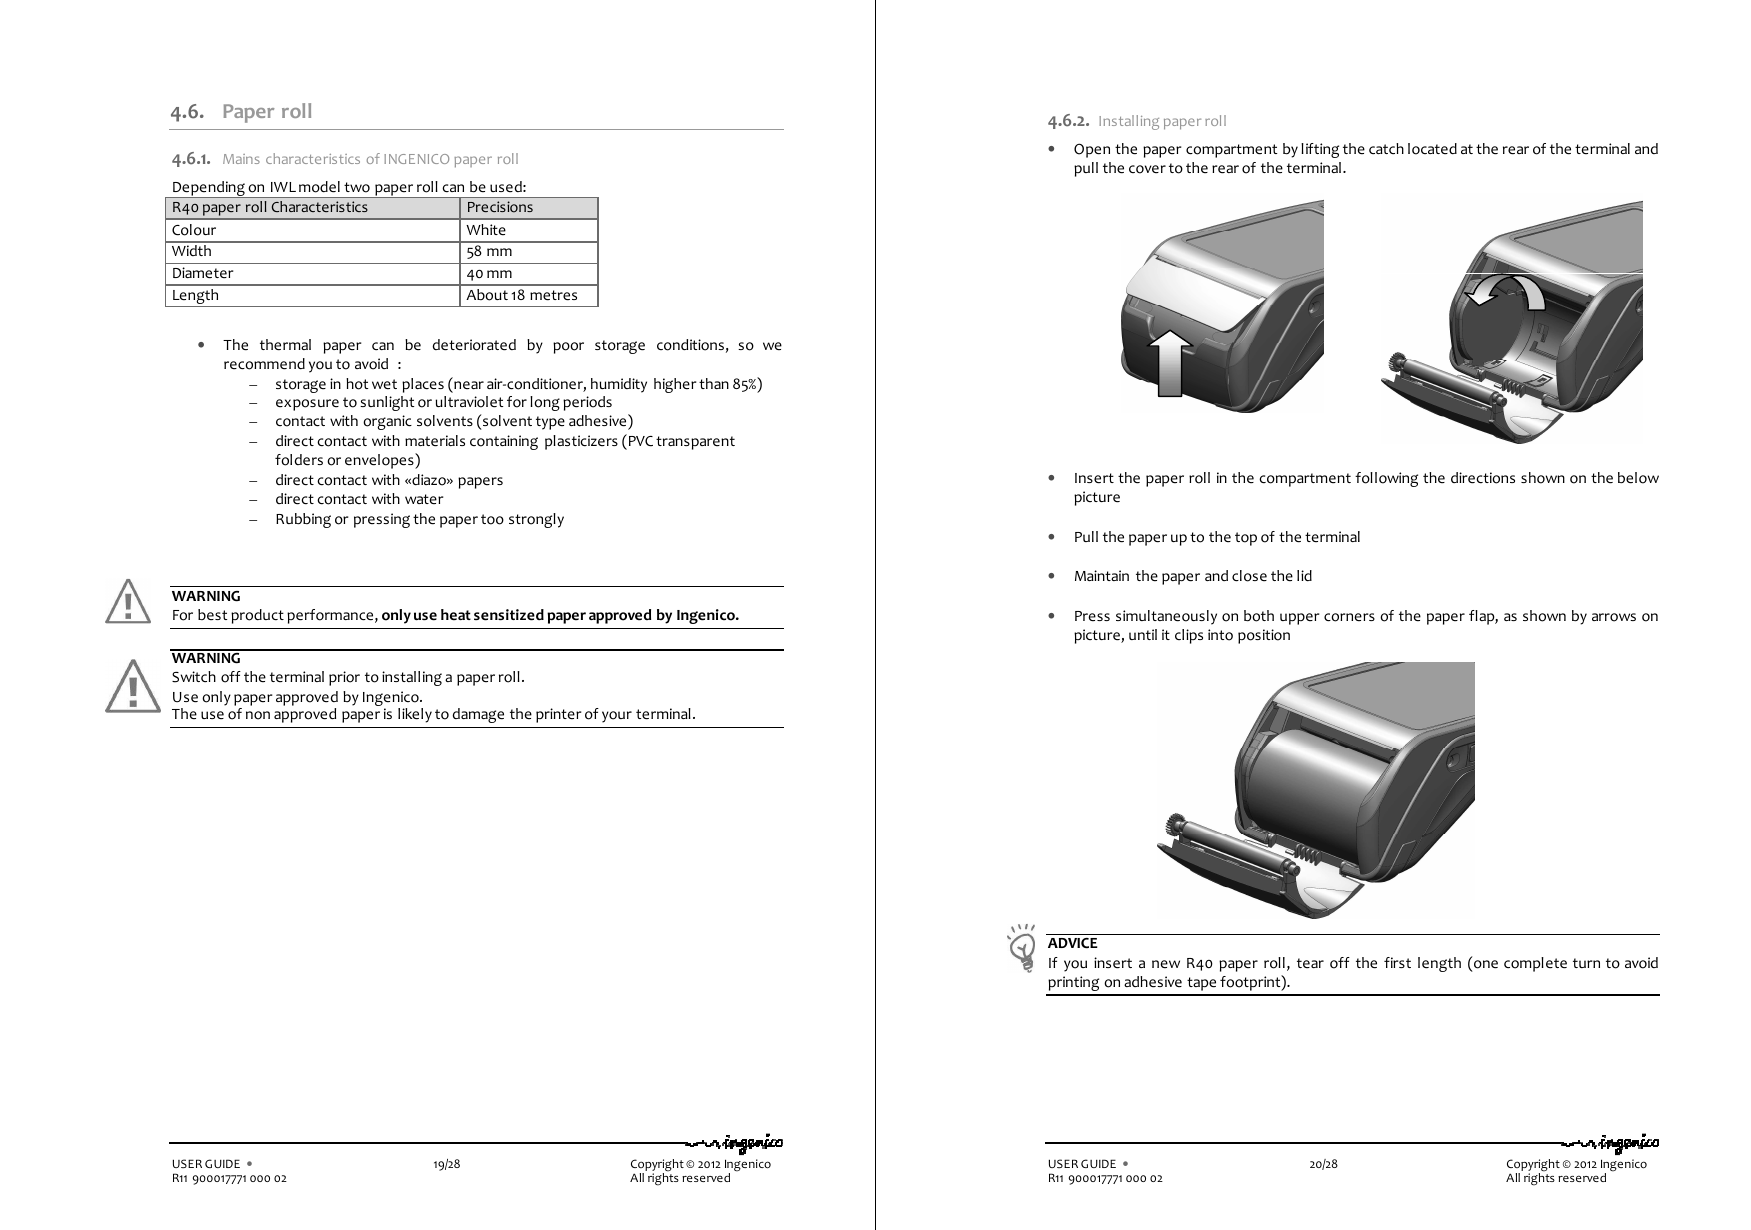   USER GUIDE  •    19/28        Copyright © 2012 Ingenico R11 900017771 000 02          All rights reserved   4.6. Paper roll 4.6.1. Mains characteristics of INGENICO paper roll Depending on IWL model two paper roll can be used: R40 paper roll Characteristics  Precisions Colour  White Width  58 mm Diameter  40 mm Length  About 18 metres   • The  thermal  paper  can  be  deteriorated  by  poor  storage  conditions,  so  we recommend you to avoid  : – storage in hot wet places (near air-conditioner, humidity  higher than 85%) – exposure to sunlight or ultraviolet for long periods – contact with organic solvents (solvent type adhesive) – direct contact with materials containing  plasticizers (PVC transparent folders or envelopes) – direct contact with «diazo» papers – direct contact with water – Rubbing or pressing the paper too strongly    WARNING For best product performance, only use heat sensitized paper approved by Ingenico.  WARNING Switch off the terminal prior to installing a paper roll. Use only paper approved by Ingenico.  The use of non approved paper is likely to damage the printer of your terminal.   USER GUIDE  •    20/28        Copyright © 2012 Ingenico R11 900017771 000 02          All rights reserved 4.6.2. Installing paper roll • Open the paper compartment by lifting the catch located at the rear of the terminal and pull the cover to the rear of the terminal.                • Insert the paper roll in the compartment following the directions shown on the below picture  • Pull the paper up to the top of the terminal   • Maintain the paper and close the lid  • Press simultaneously on both upper corners of the paper flap, as shown by arrows on picture, until it clips into position                                ADVICE If  you  insert  a  new R40  paper  roll, tear off  the  first  length  (one complete turn to avoid printing on adhesive tape footprint).   